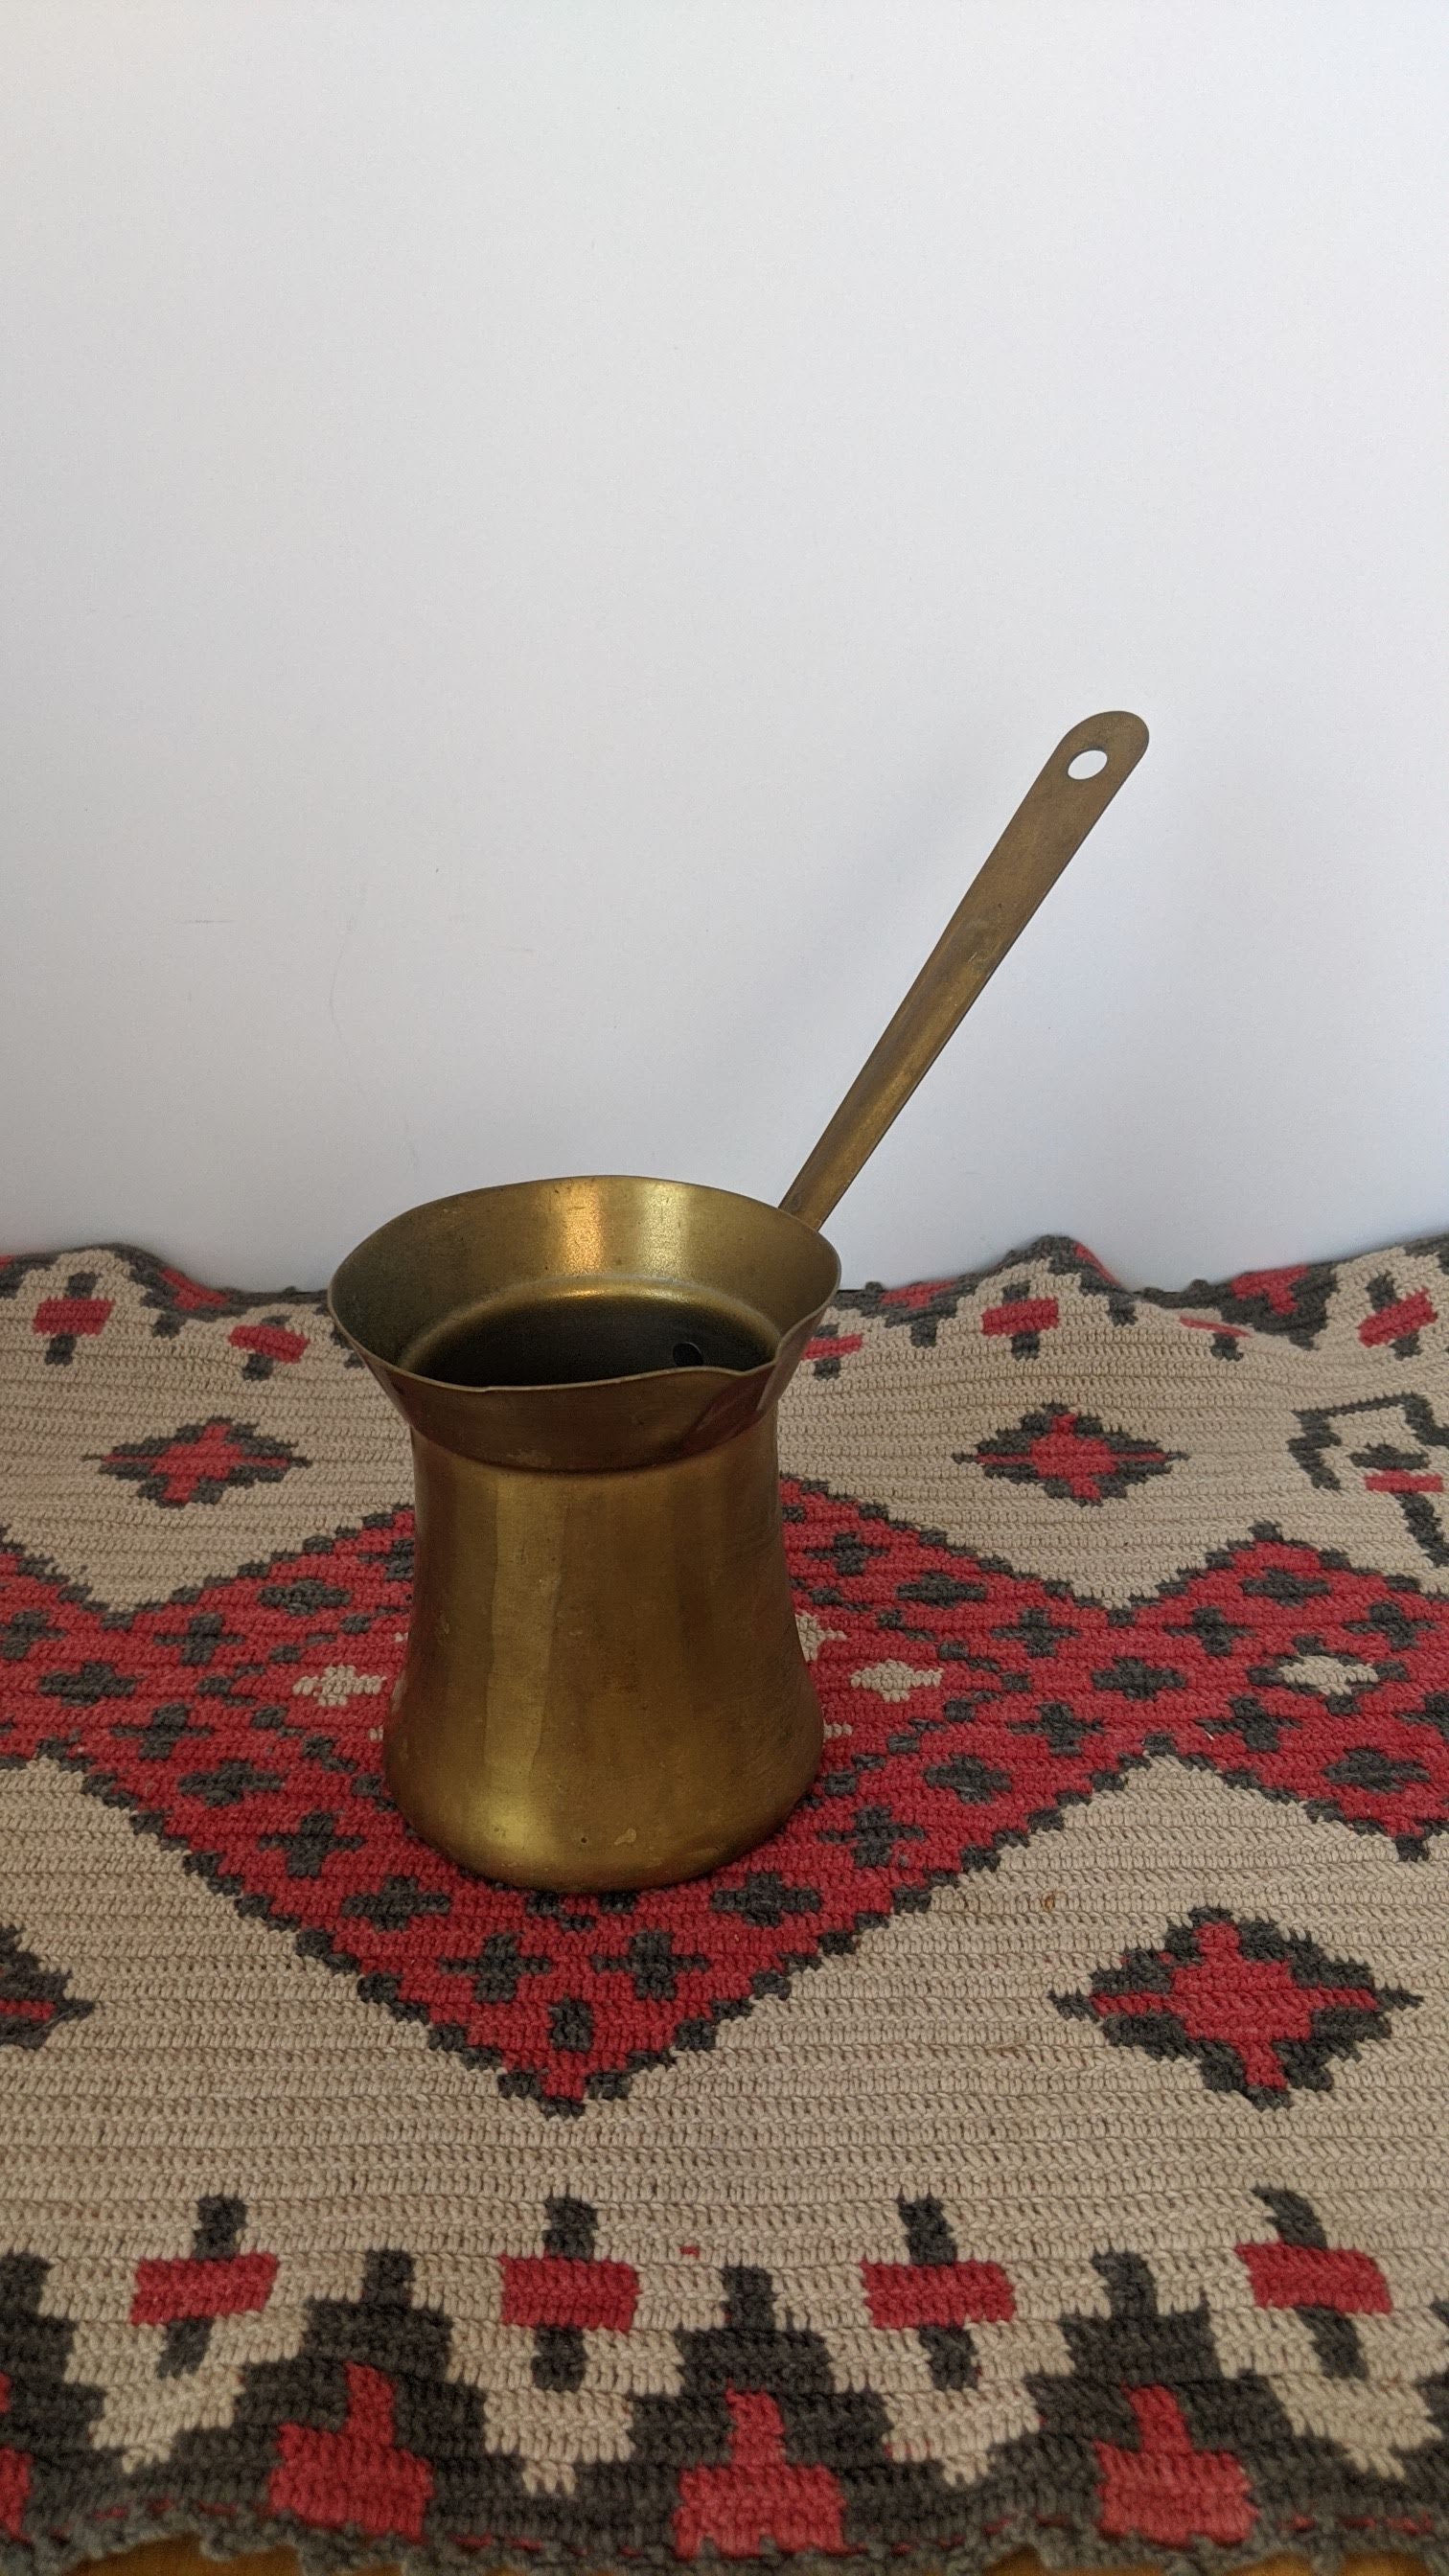 Candle Wax Melter, 8-10lbs of Wax, Brass Fittings 